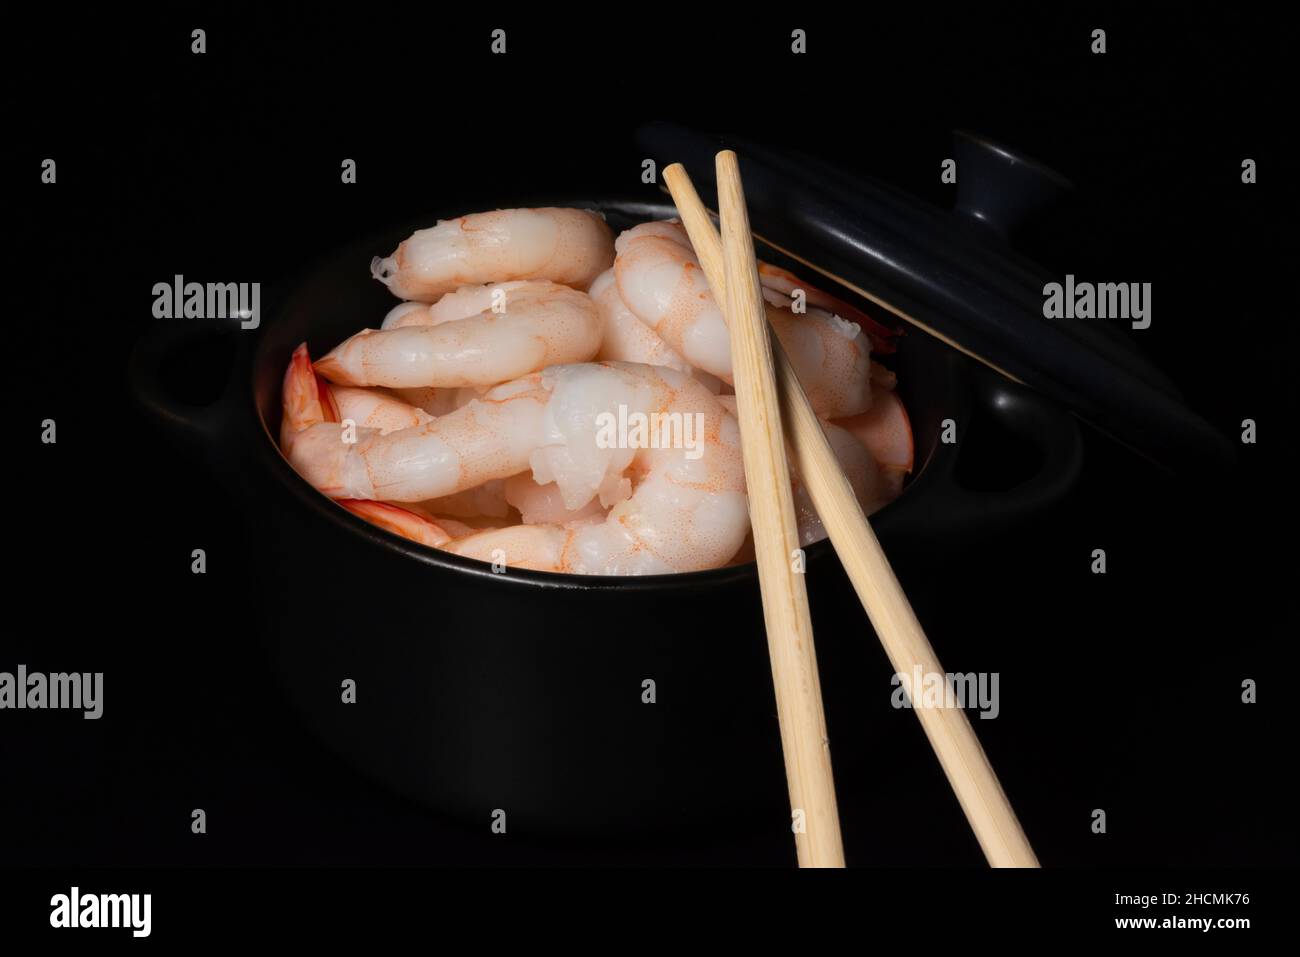 Contrast view of cooked prawns and chopsticks in bowl on black background. Stock Photo